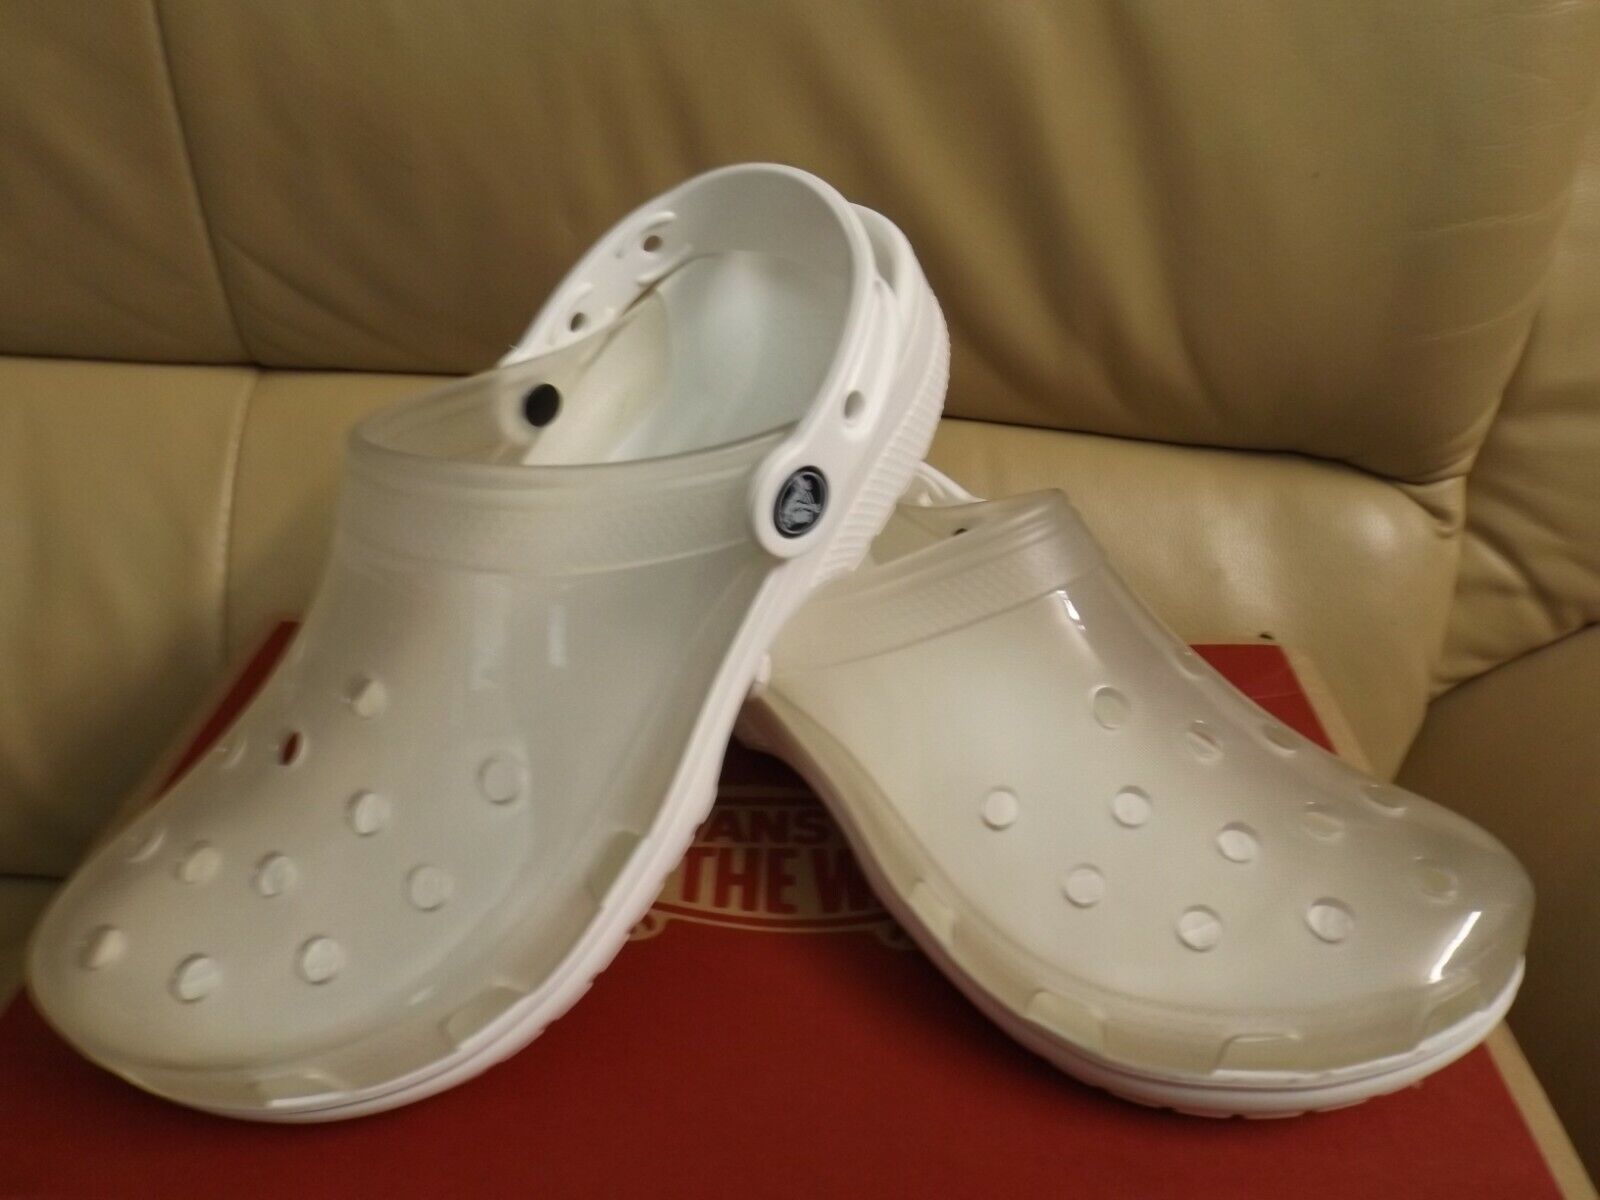 Crocs Translucent Clear Clog Classic Women's Size 6 Shoes White 206908-100  NEW